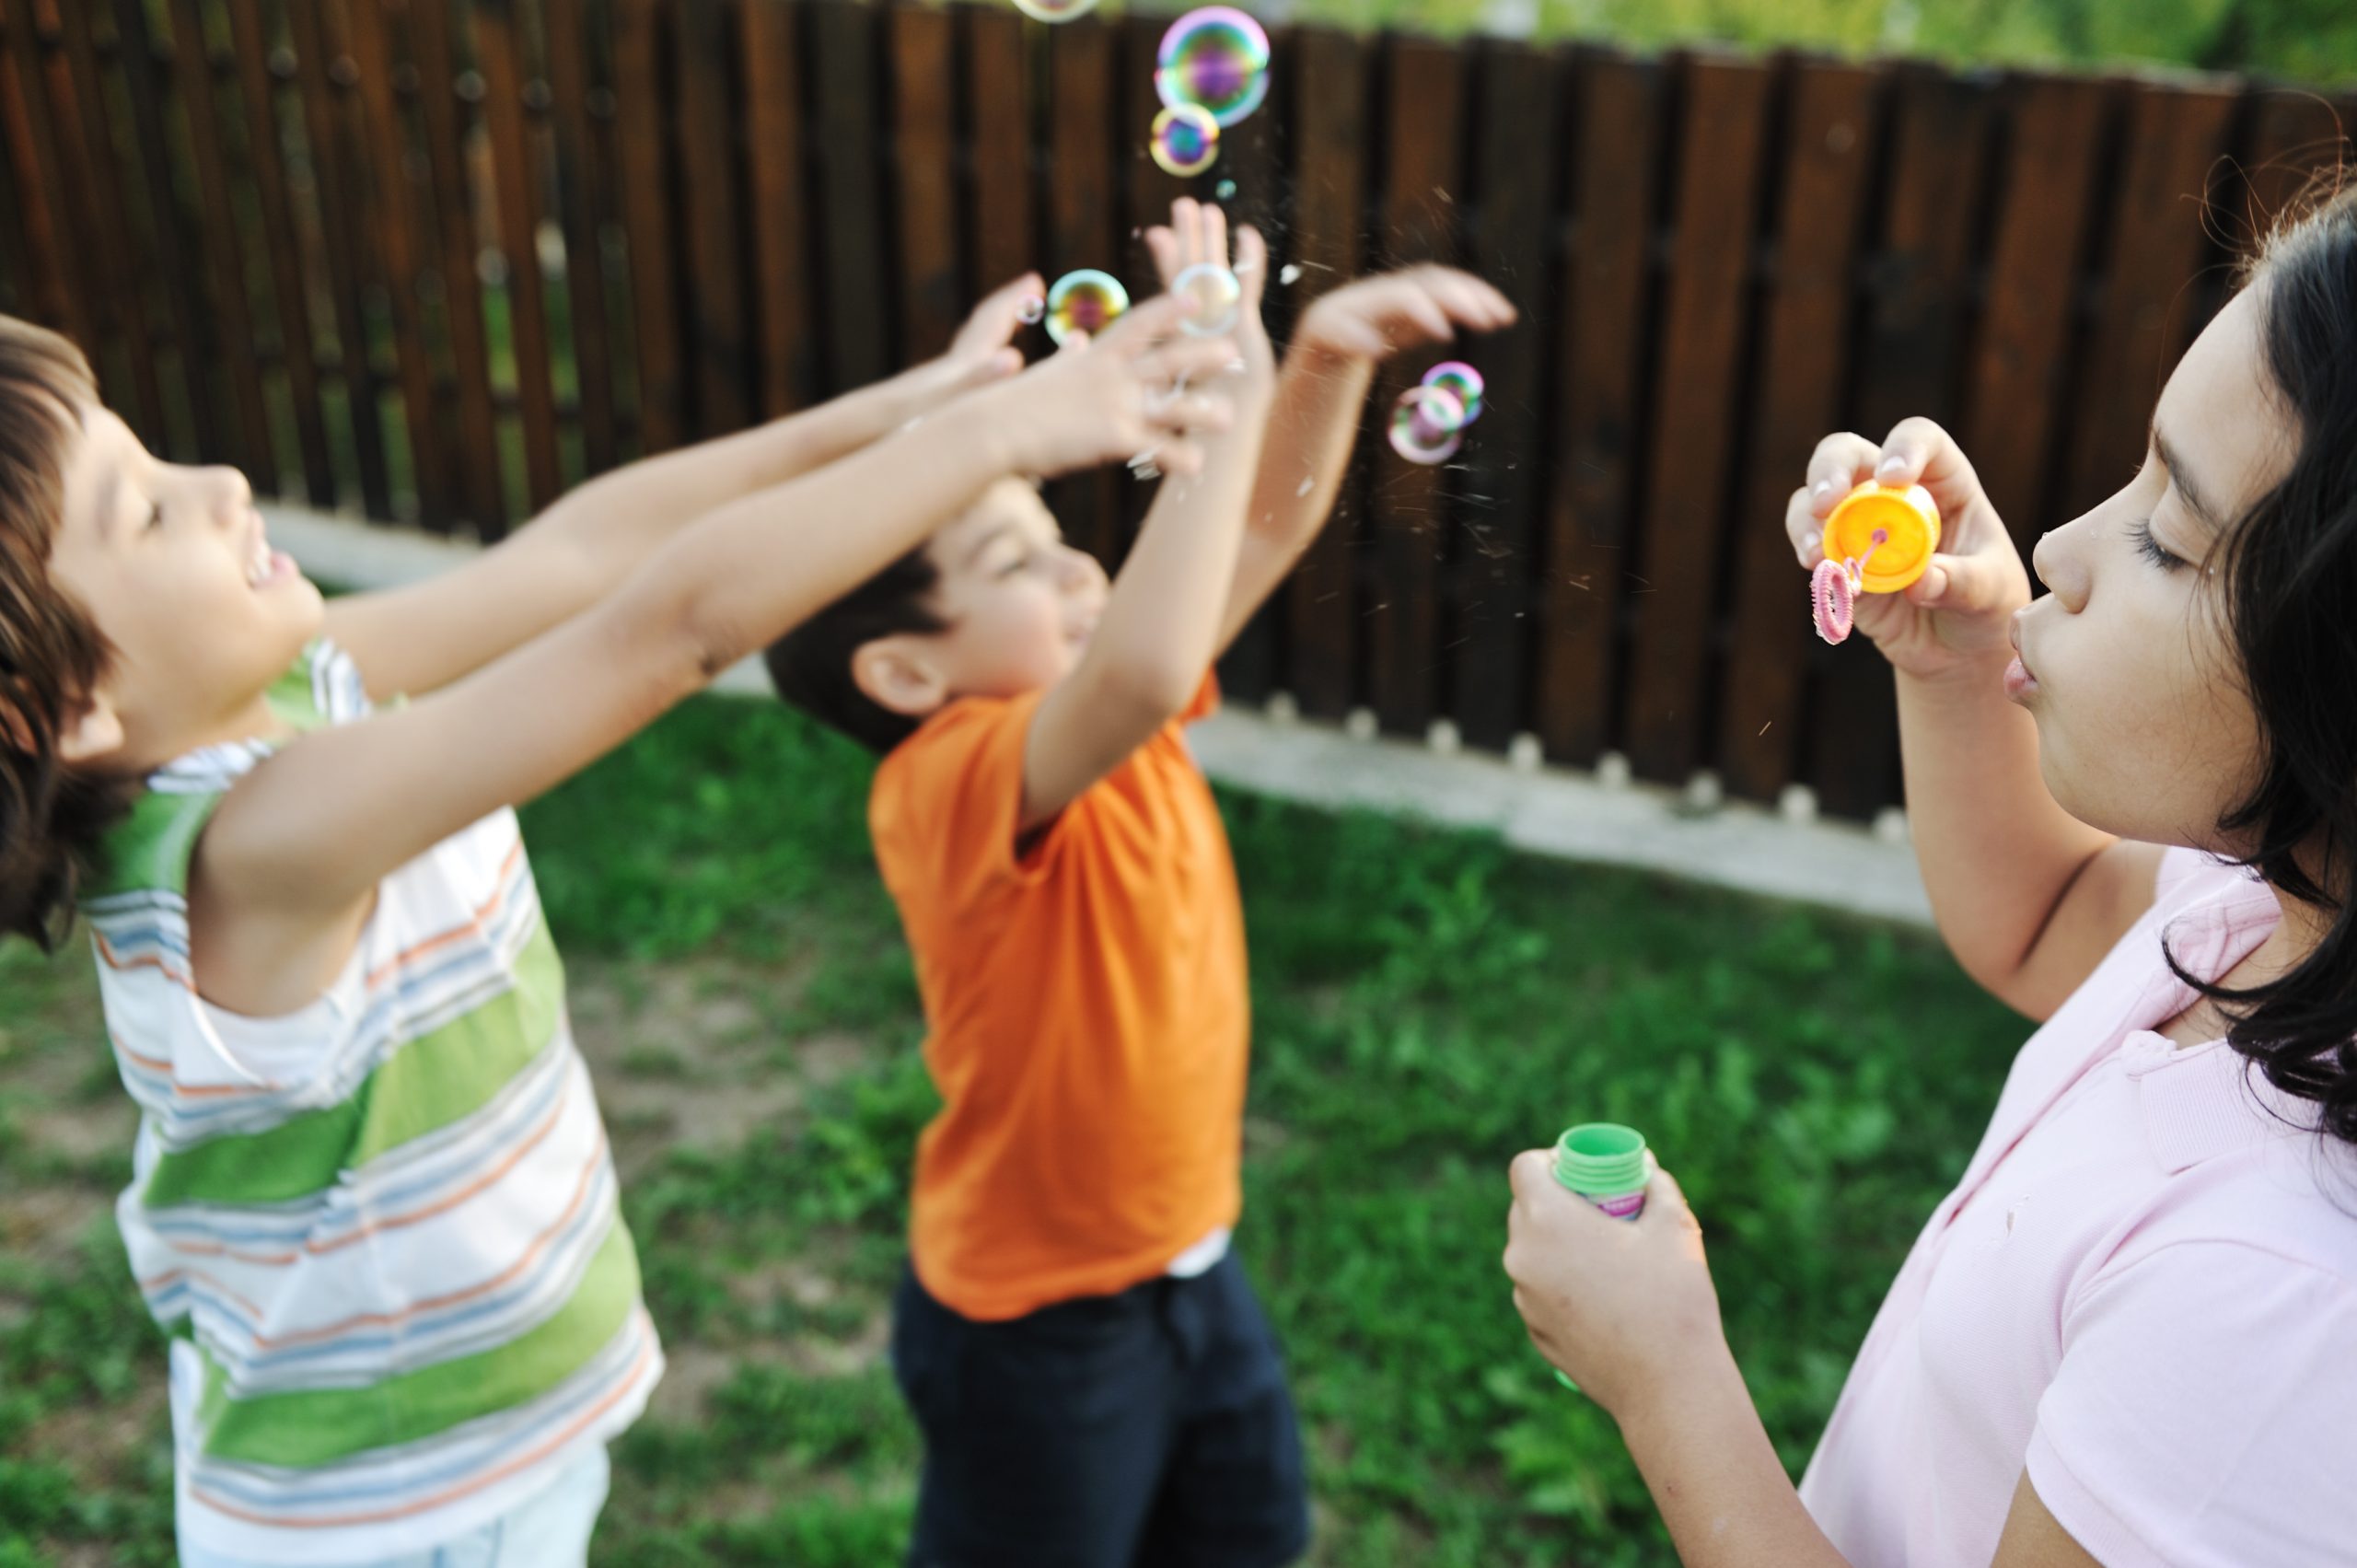 Children playing with bubbles outdoor